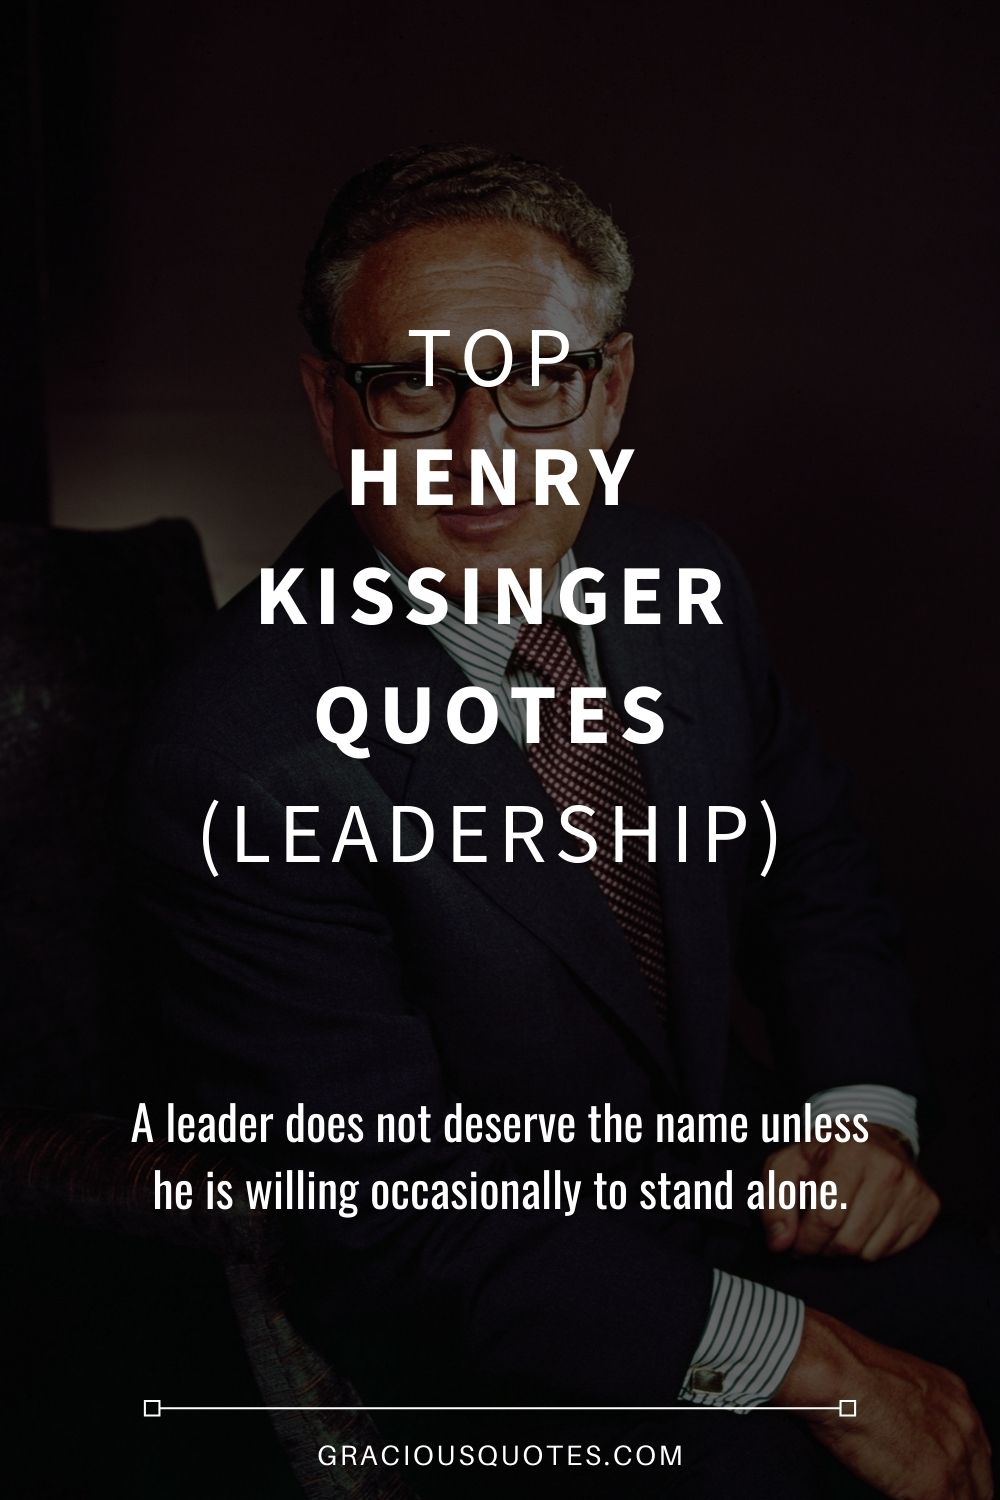 Top Henry Kissinger Quotes (LEADERSHIP) - Gracious Quotes